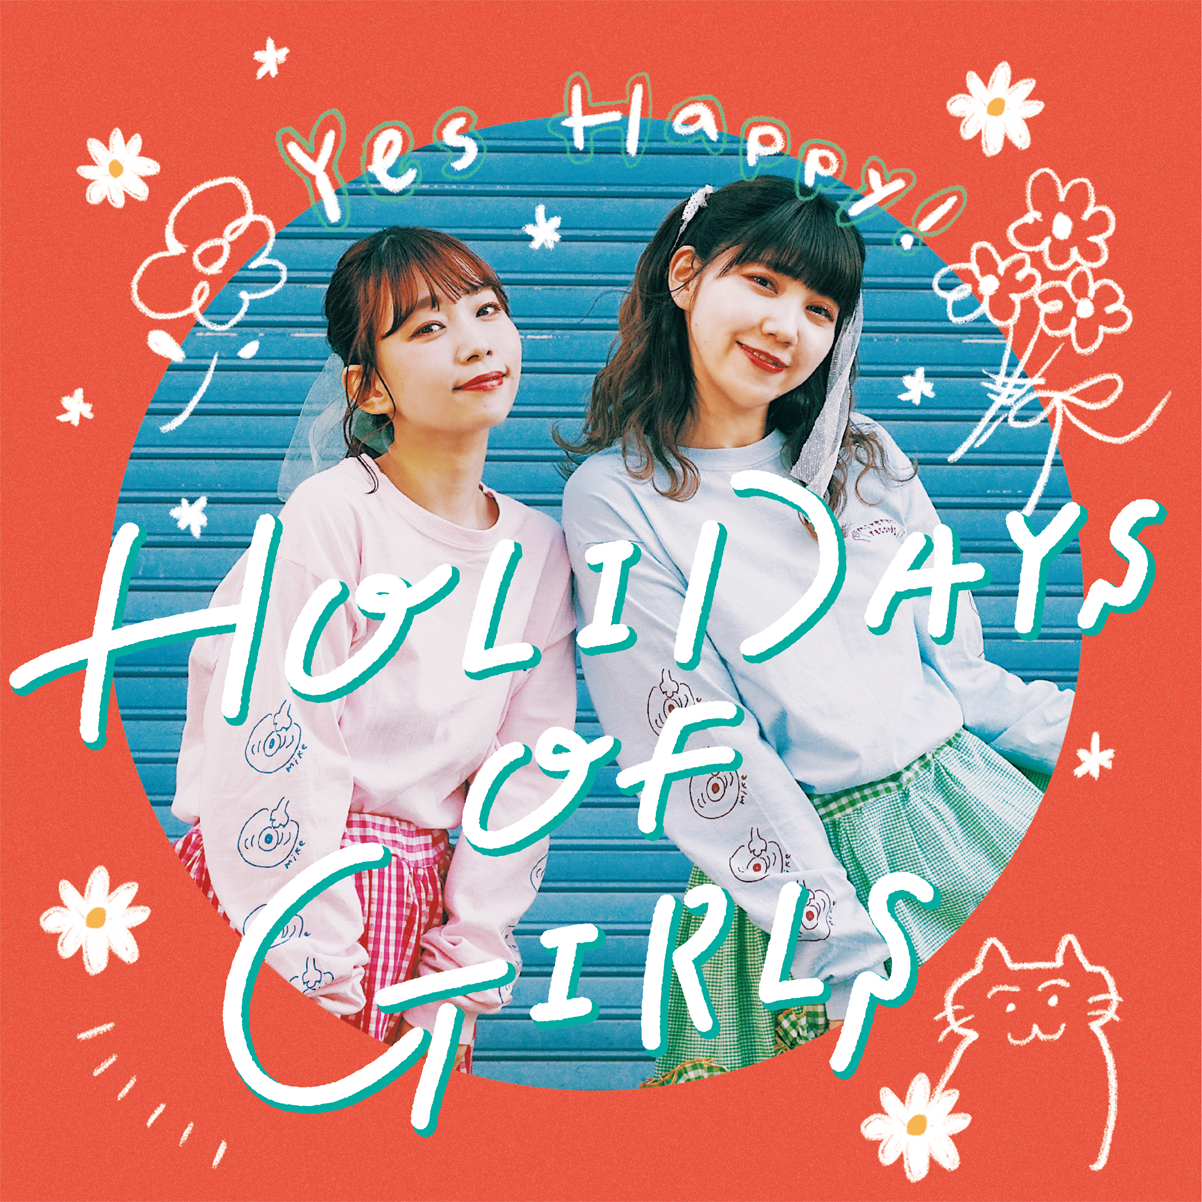 HOLIDAYS OF GIRLS | Yes Happy!公式ホームページ